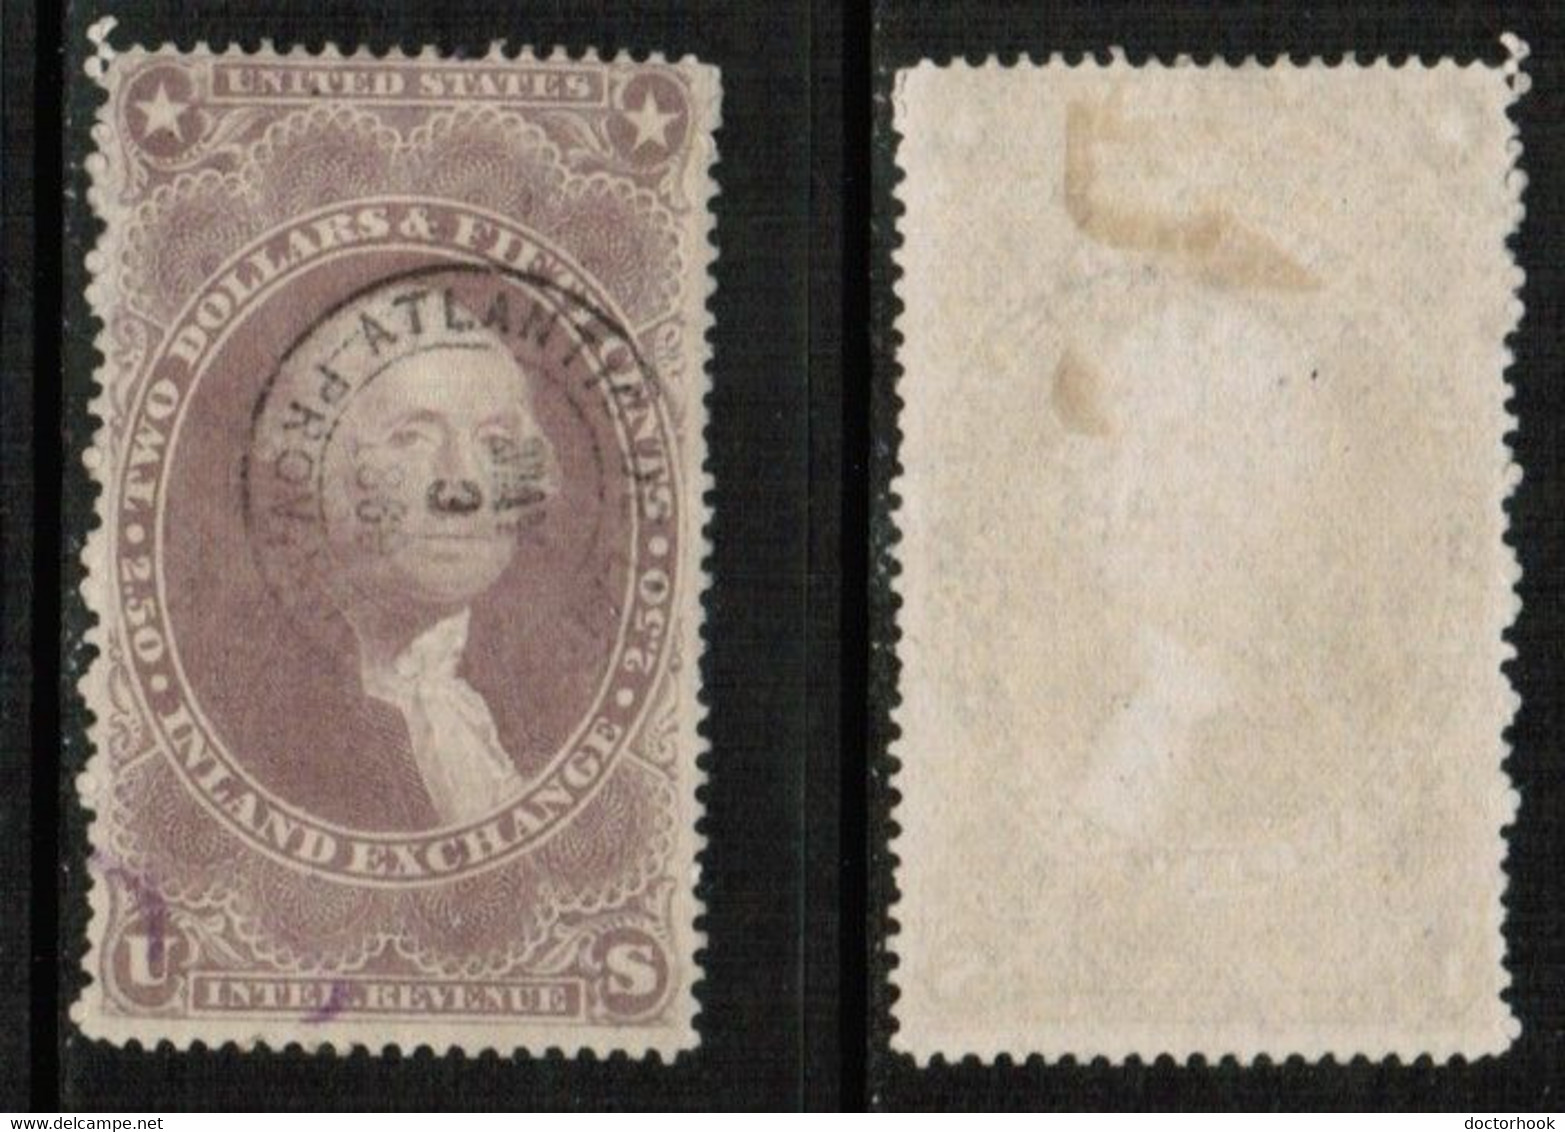 U.S.A.   Scott # R 84c USED (CONDITION AS PER SCAN) (Stamp Scan # 852-2) - Revenues